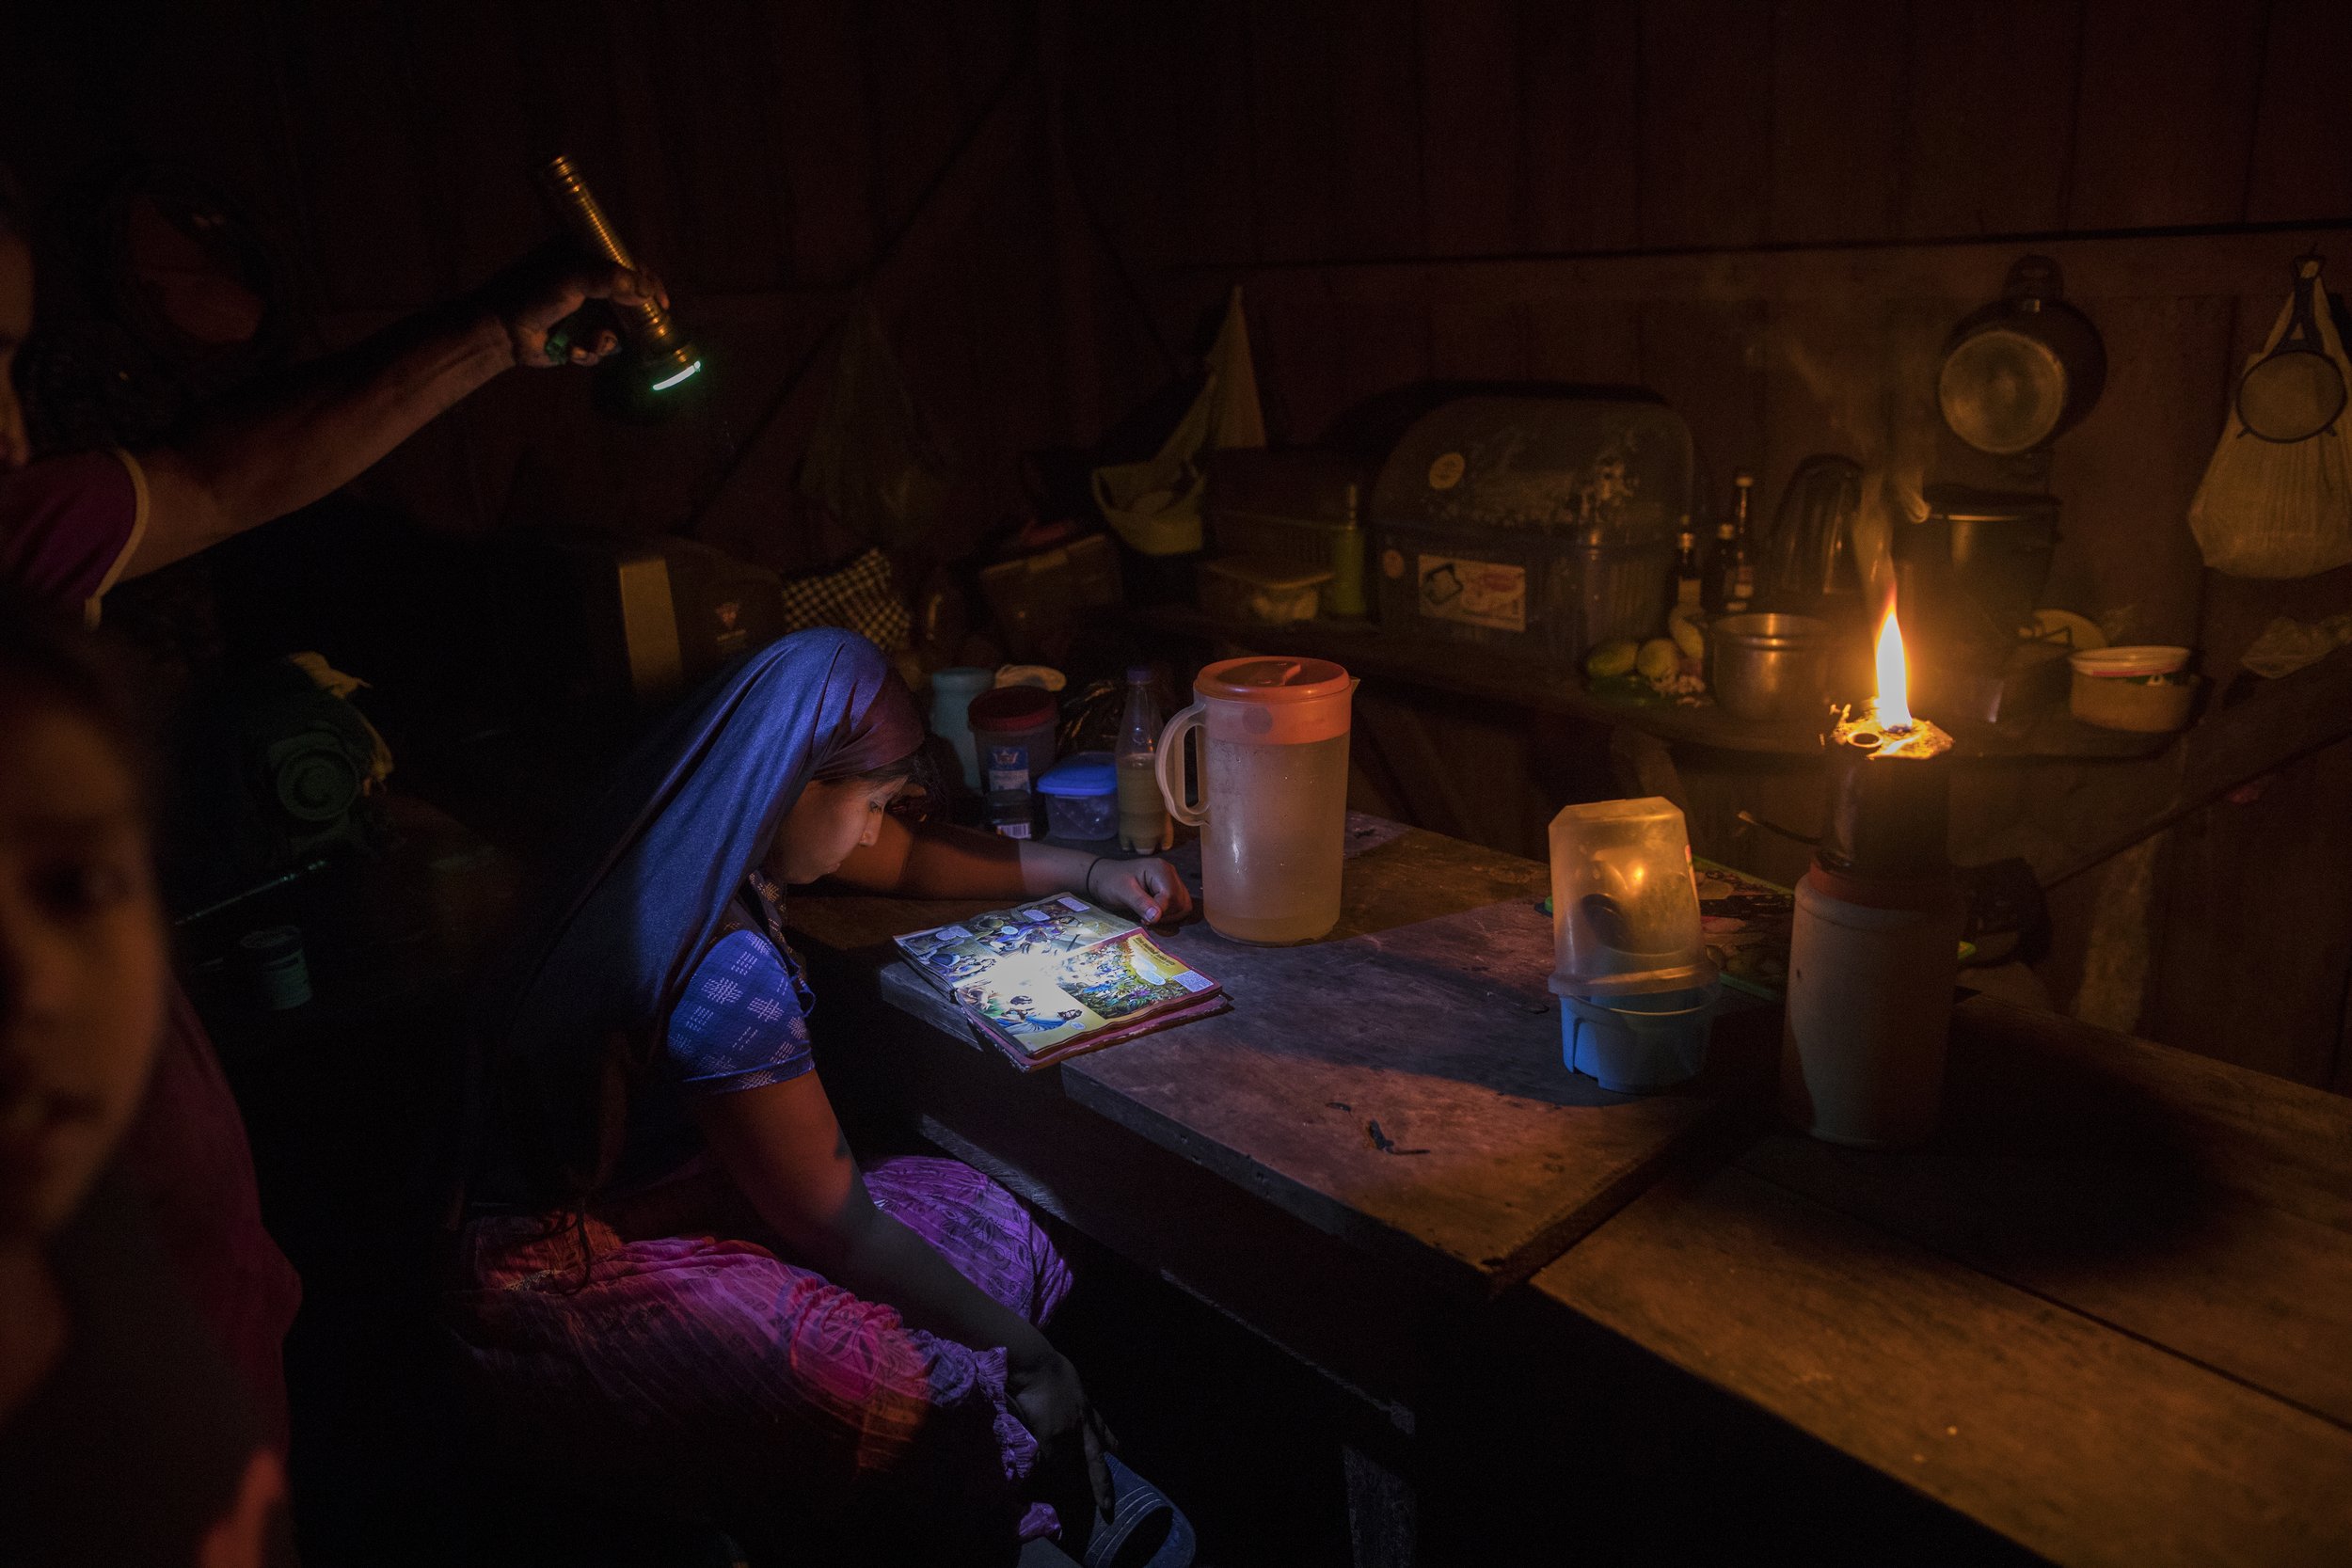  With the aid of a flashlight and a kerosene flame, 12-year-old Zairi Olivia, a member of the evangelical Christian sect Israelites of the New Universal Pact, looks at The Children's Illustrated Bible in her house in Jose Carlos Mariategui, Peru, a v